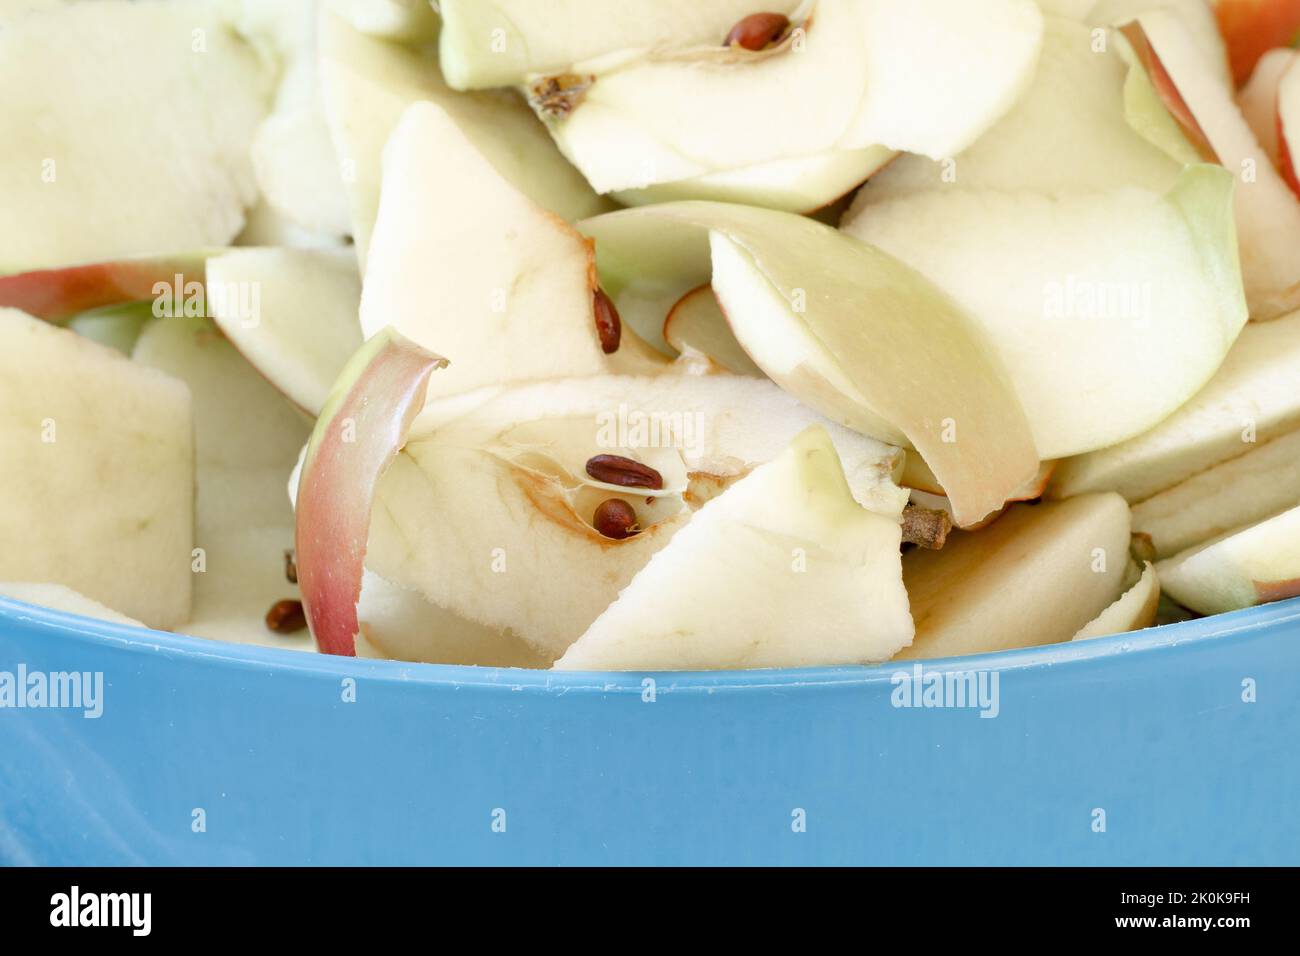 Sliced apples and peelings in blue bowl ready for composting Stock Photo